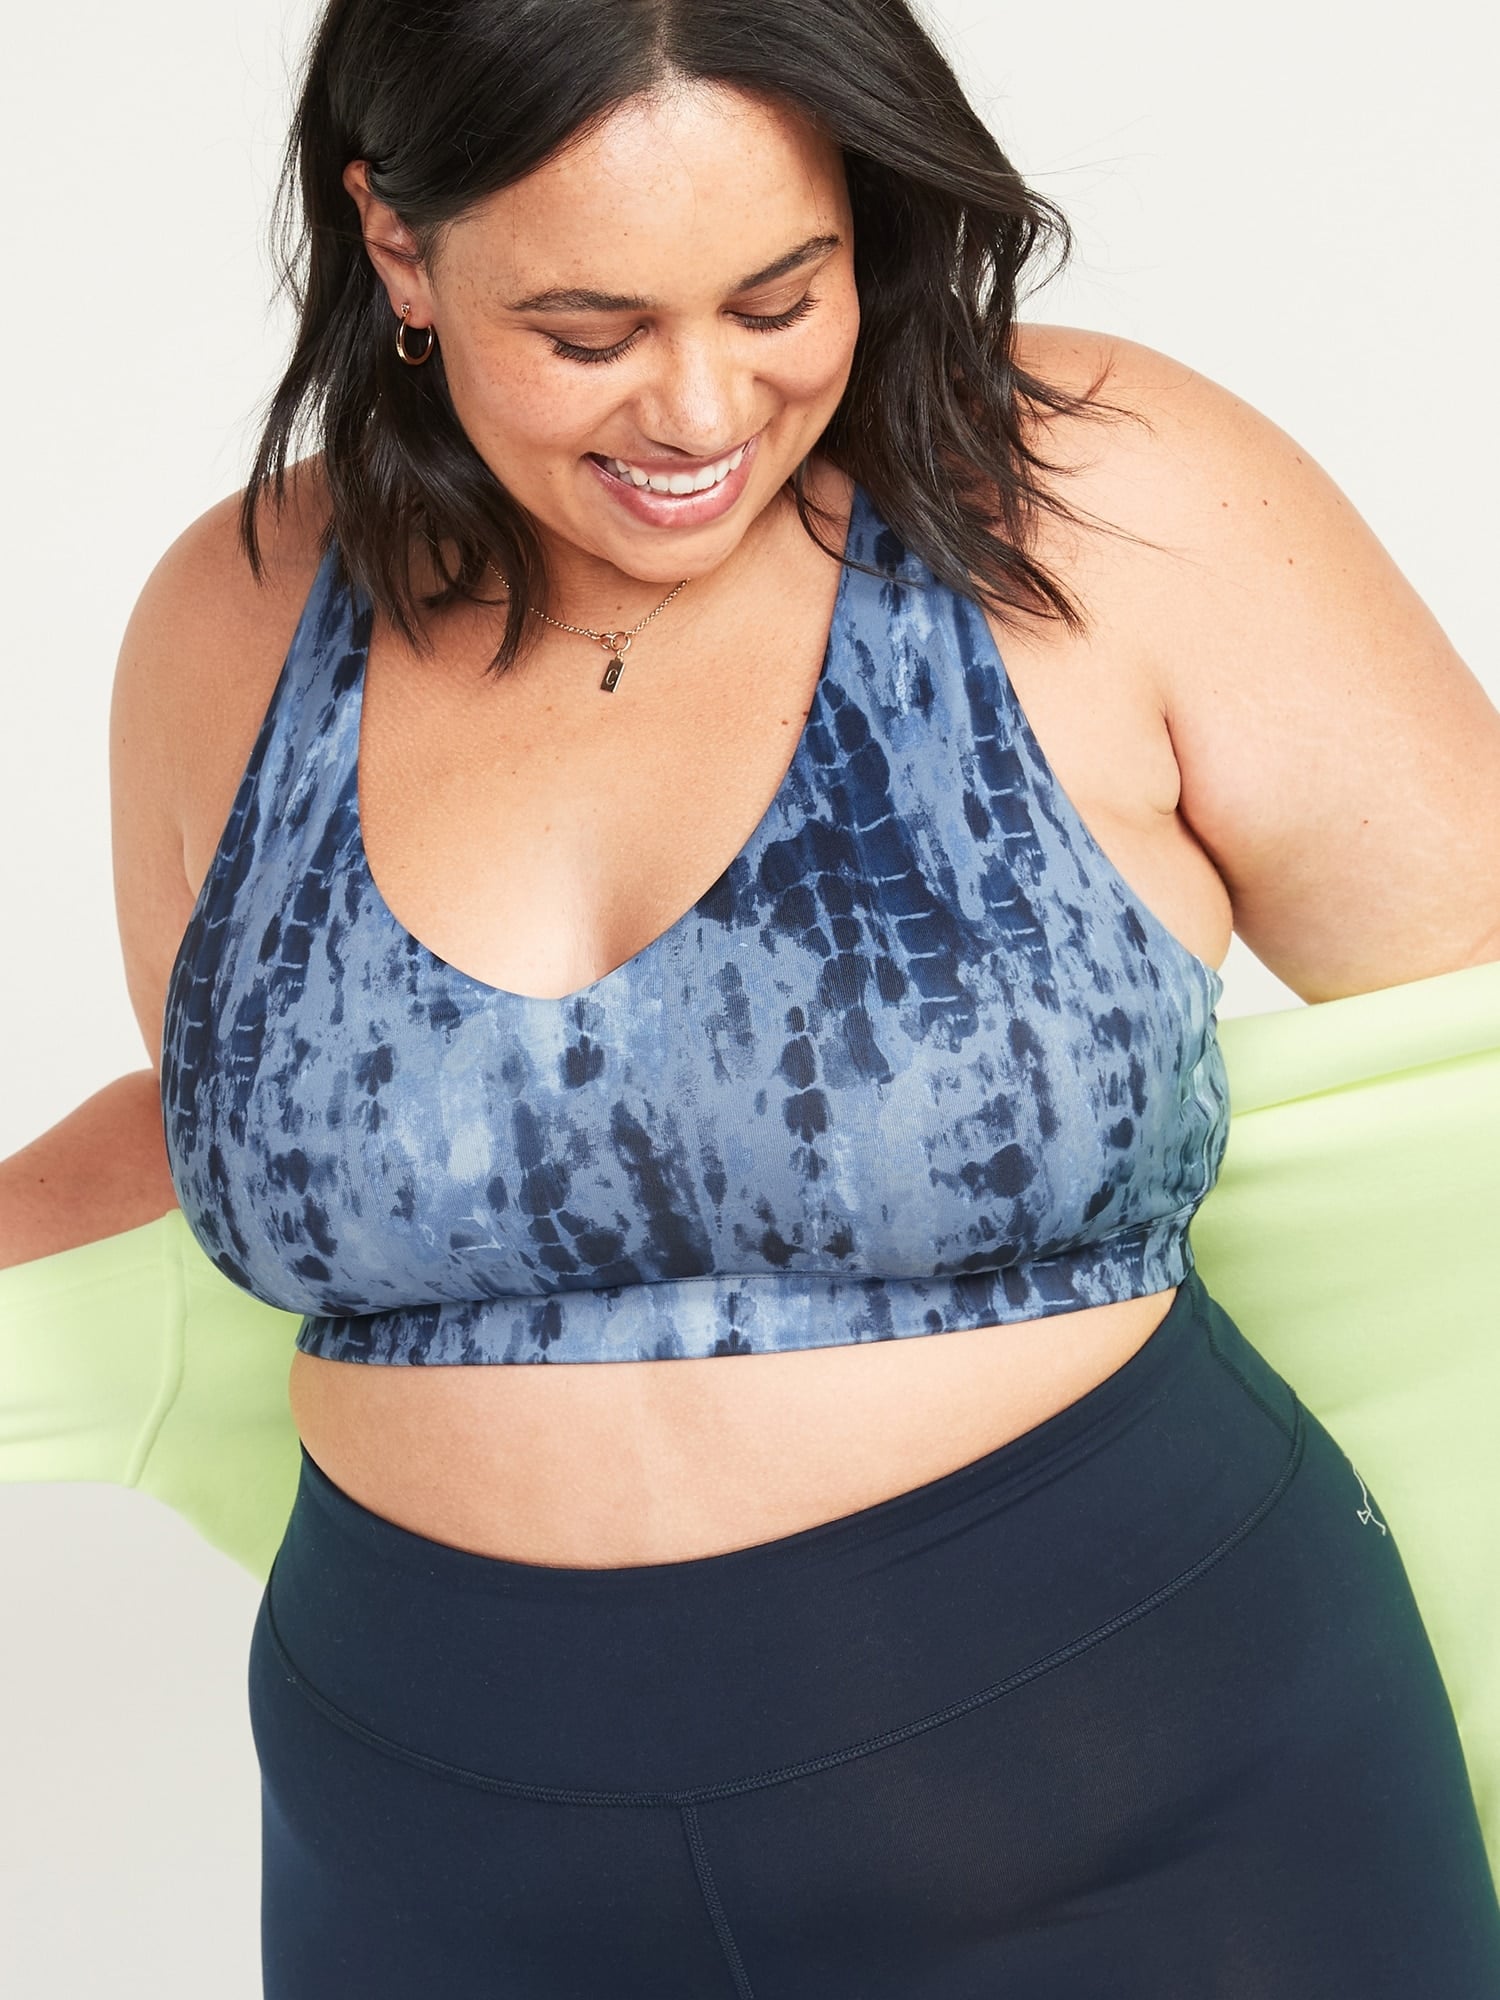 The Best Plus Size Workout Clothes - Our Guide & Must Have Picks!